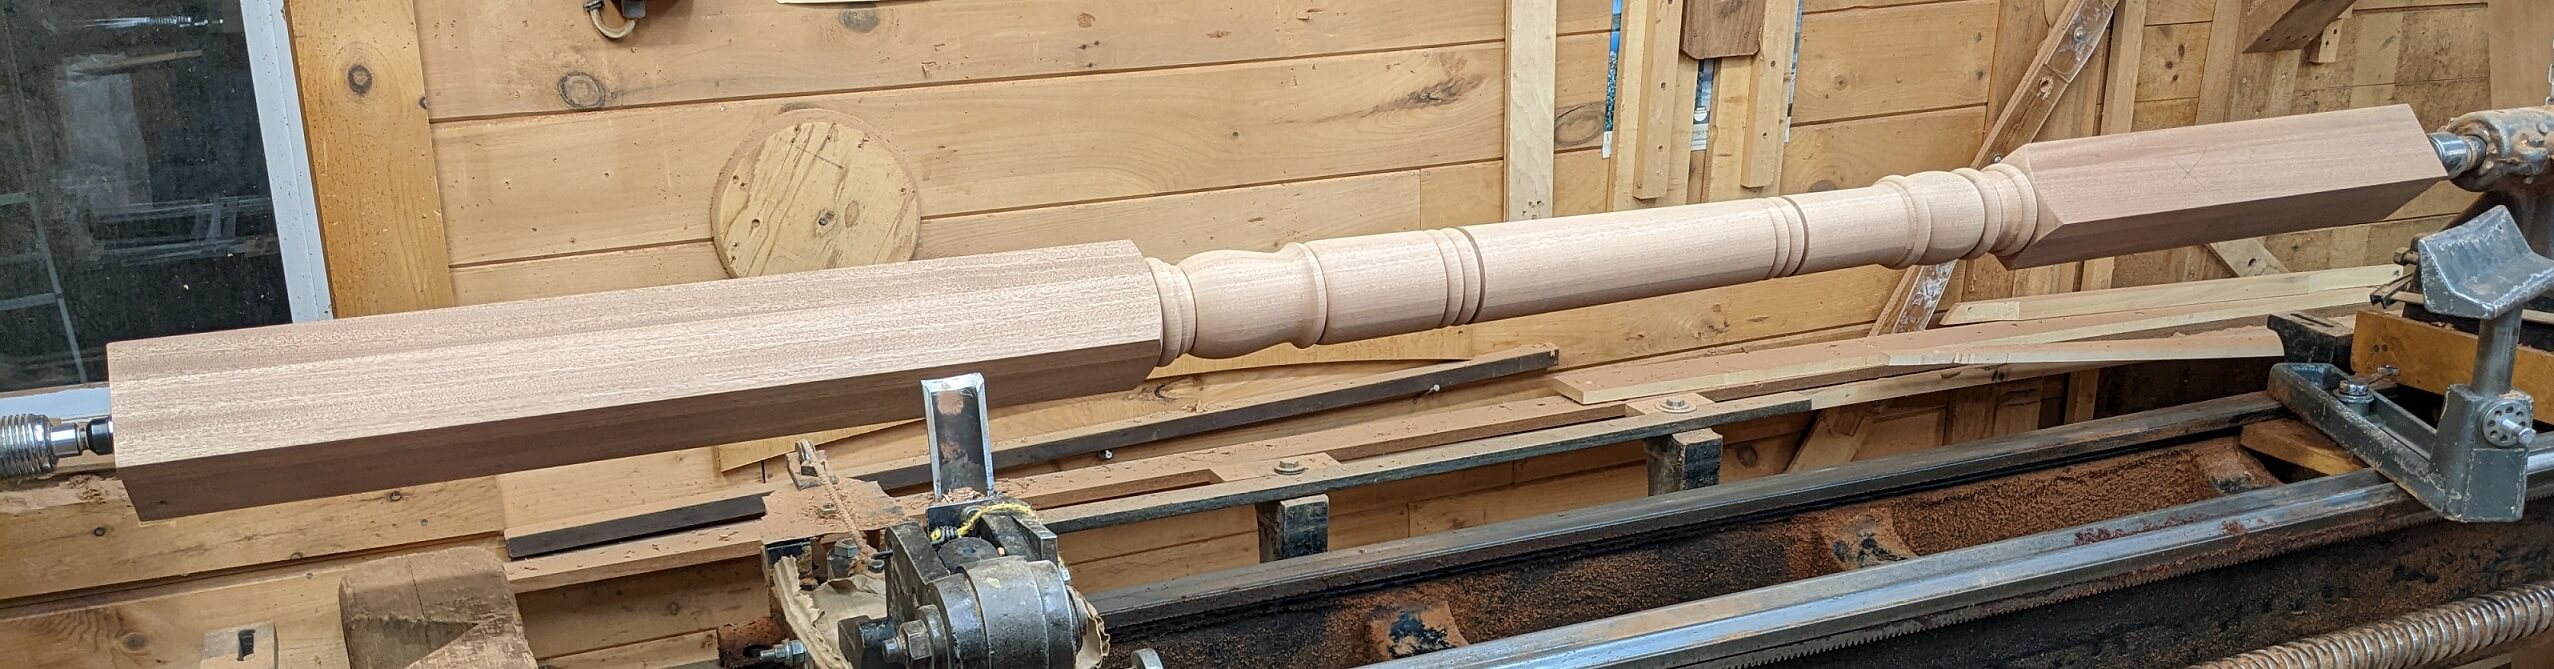 Mahogany Post being turned on a lathe